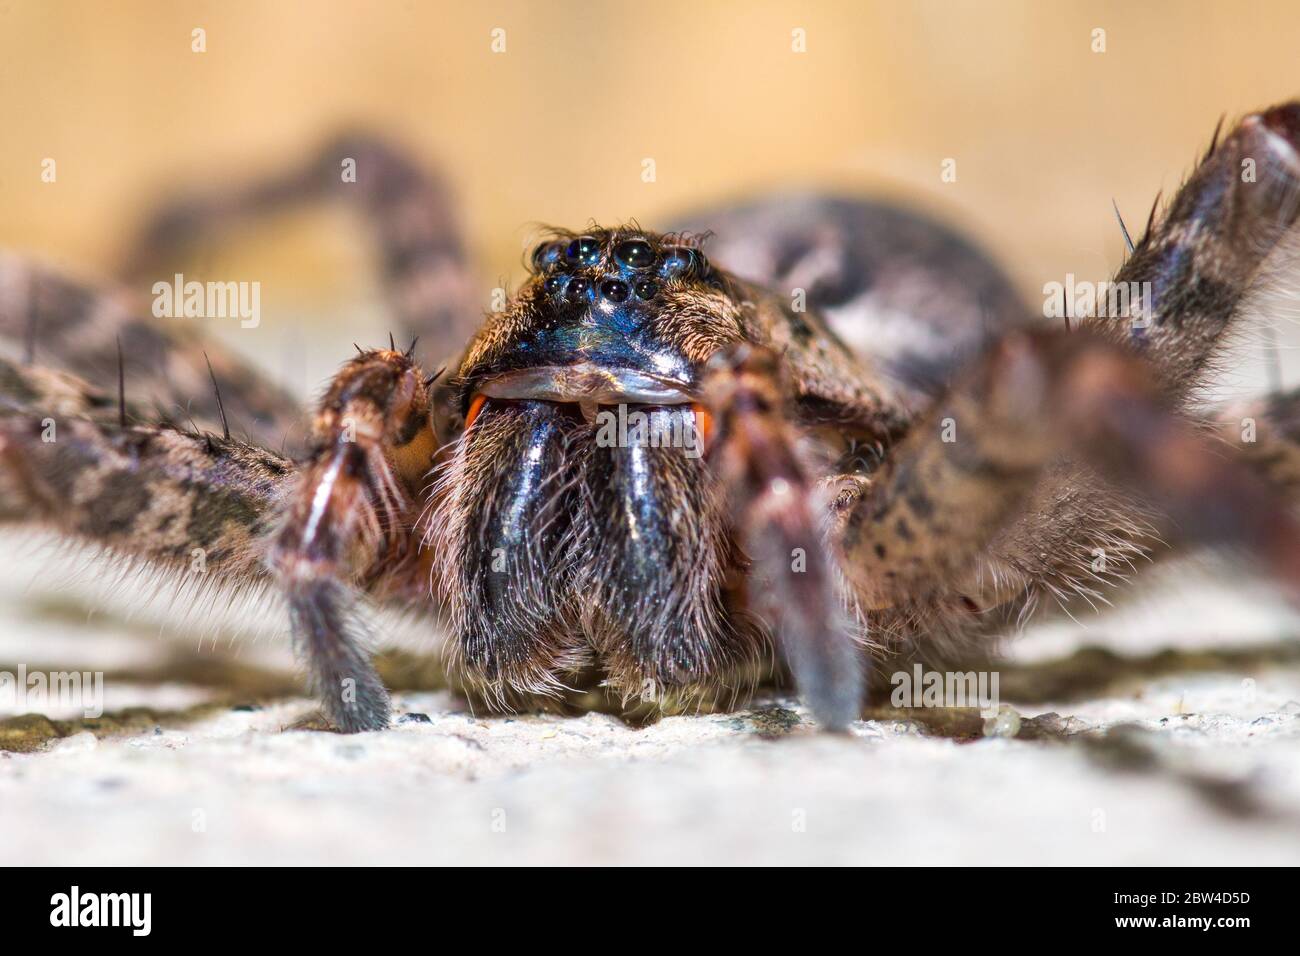 A close-up of a dark fishing spider ( Dolomedes tenebrosus ) in Ontario, Canada. Stock Photo